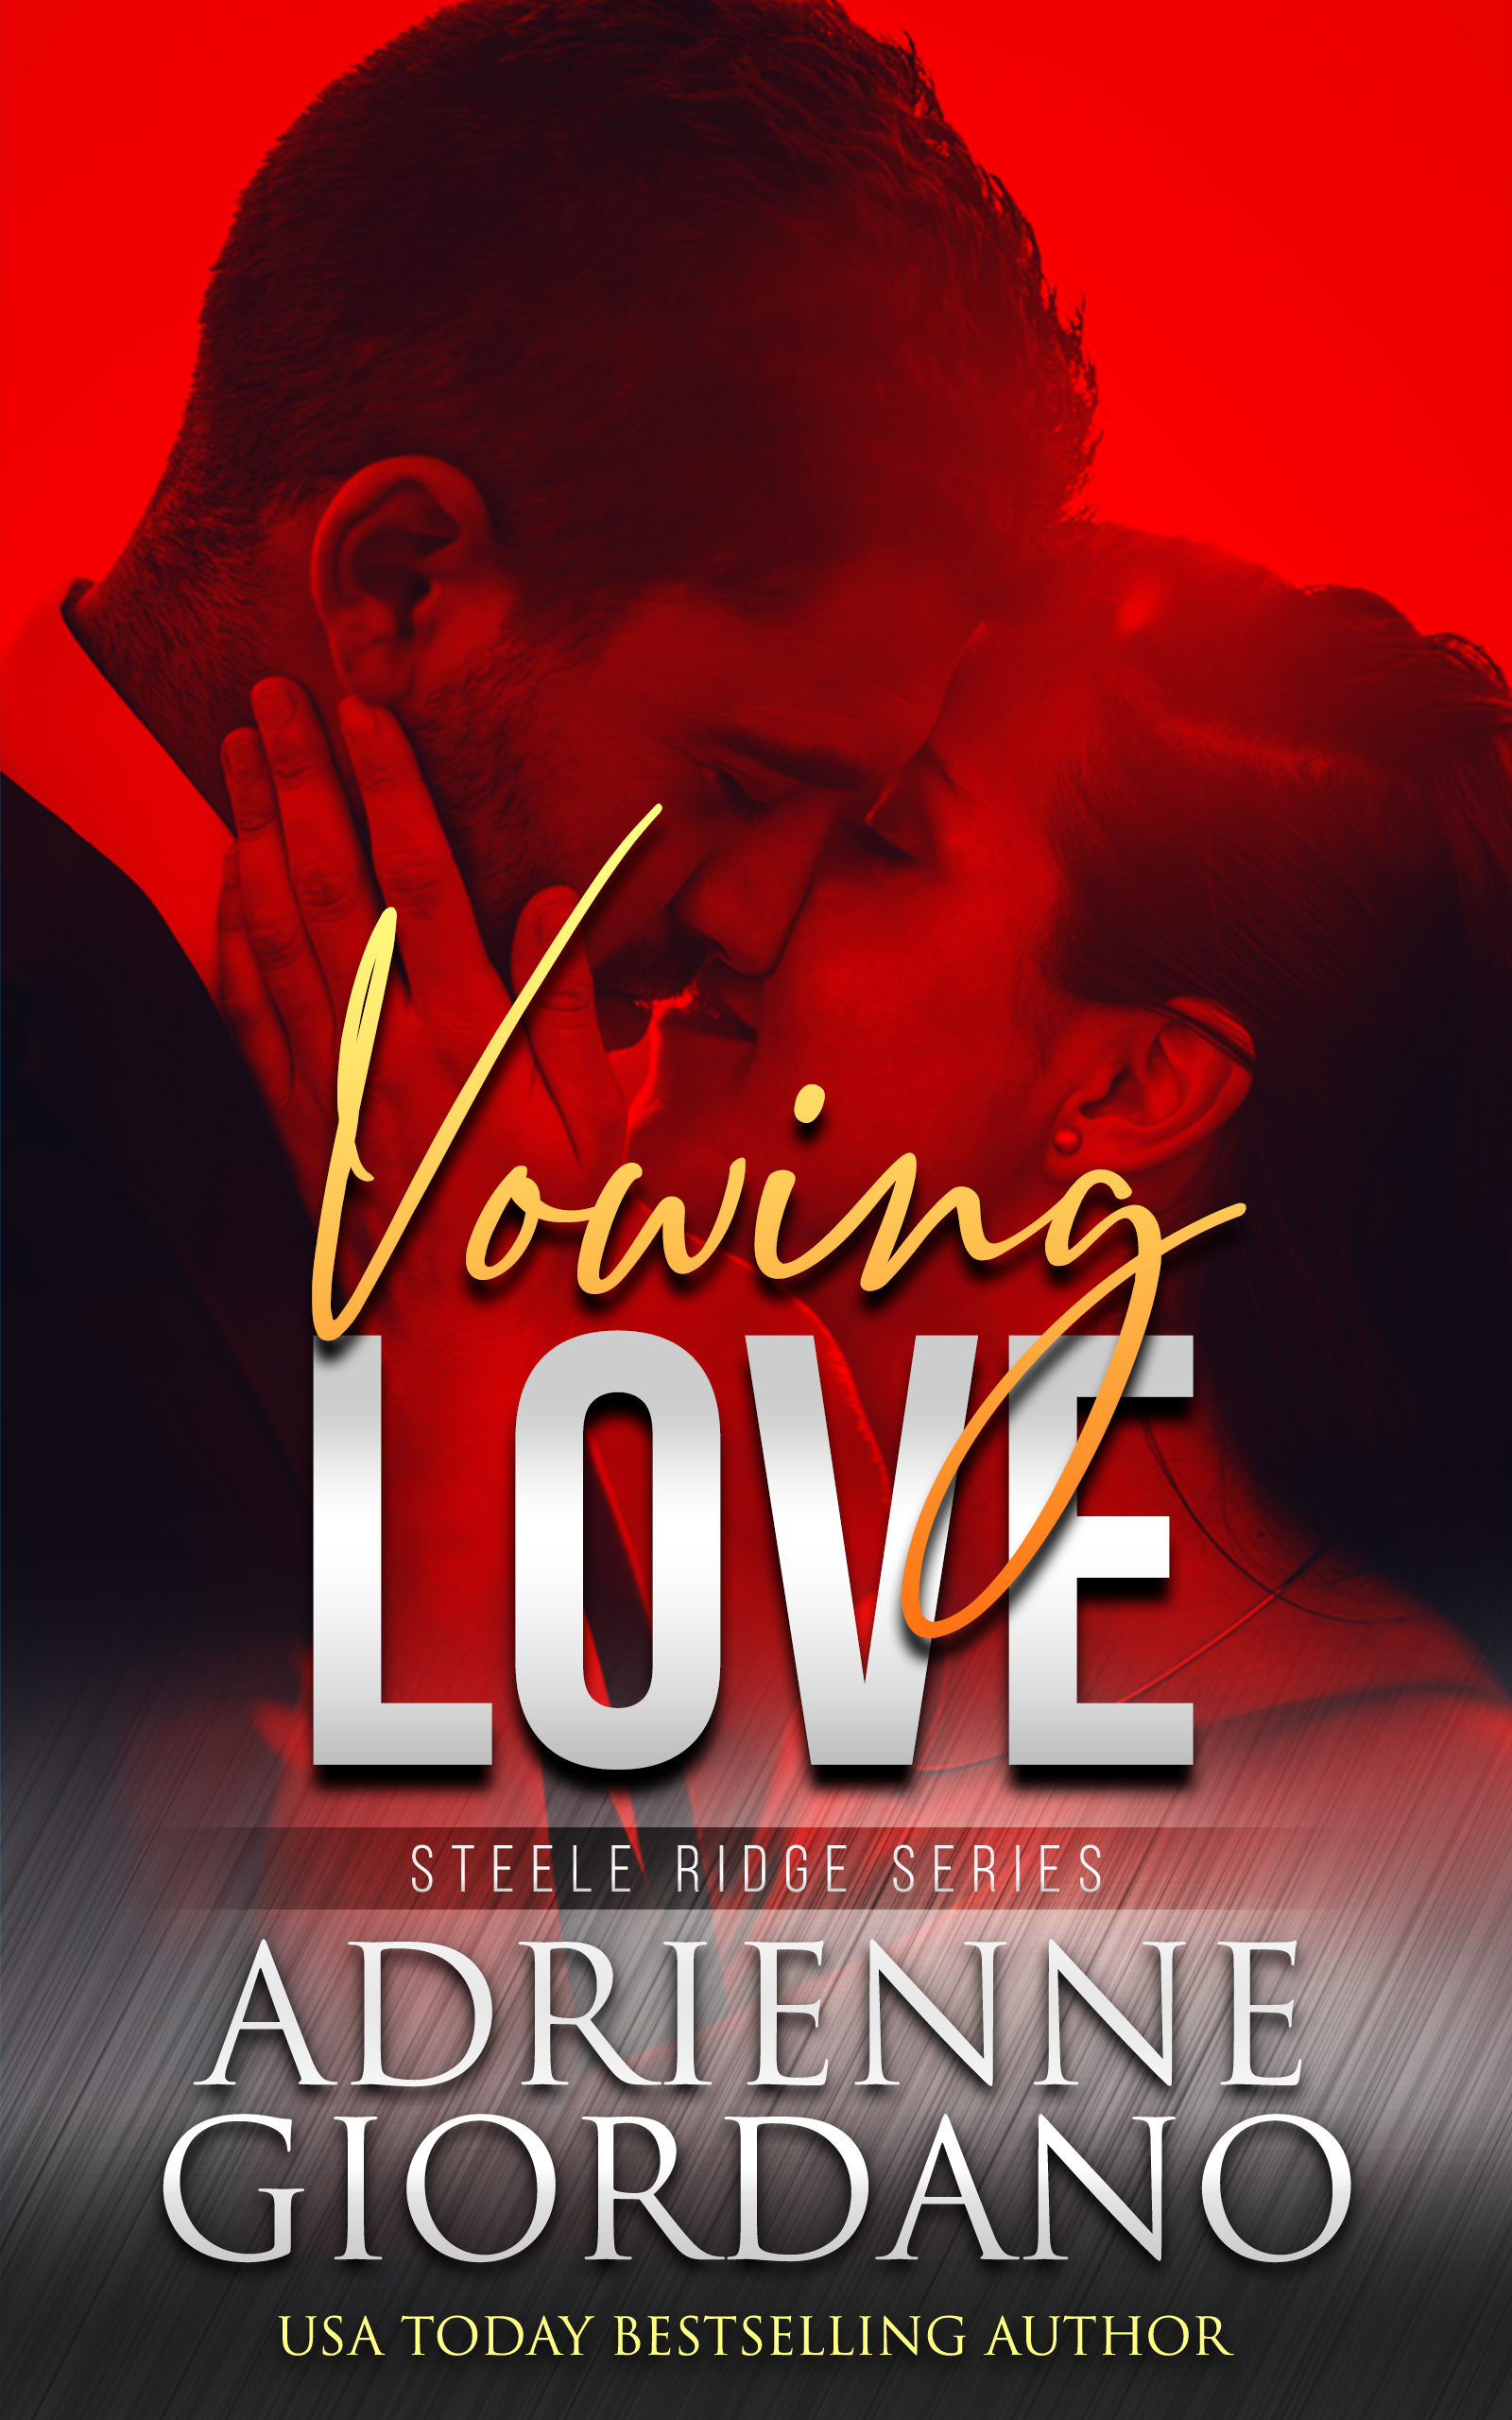 Cover for Vowing Love by Adrienne Giordano; Couple kissing with a red overlay; happy